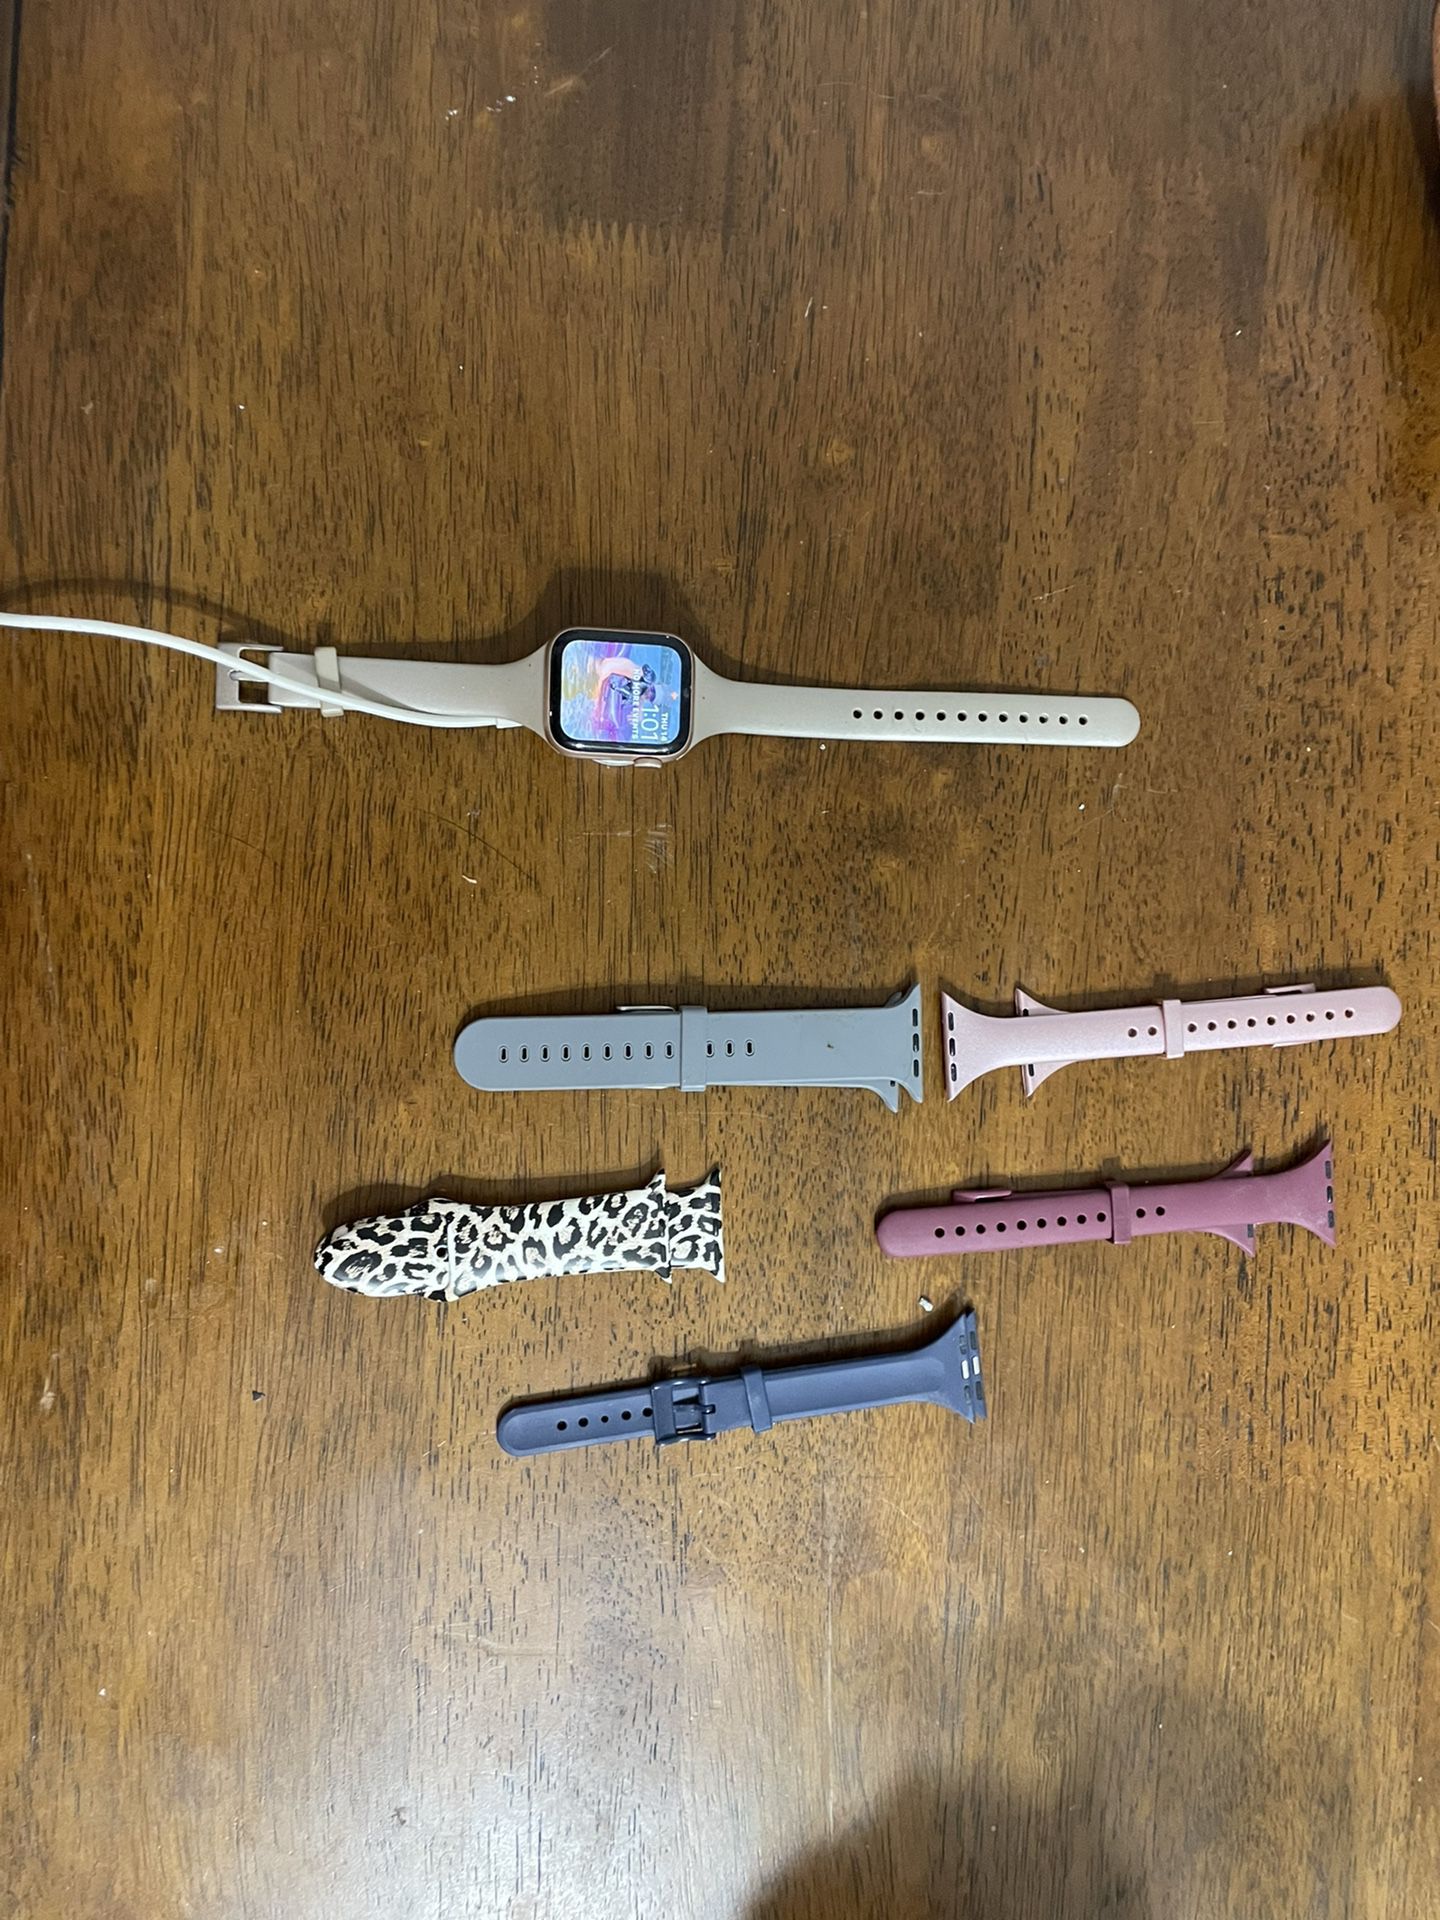 Apple Watch 4 Series with 5 additional bands 